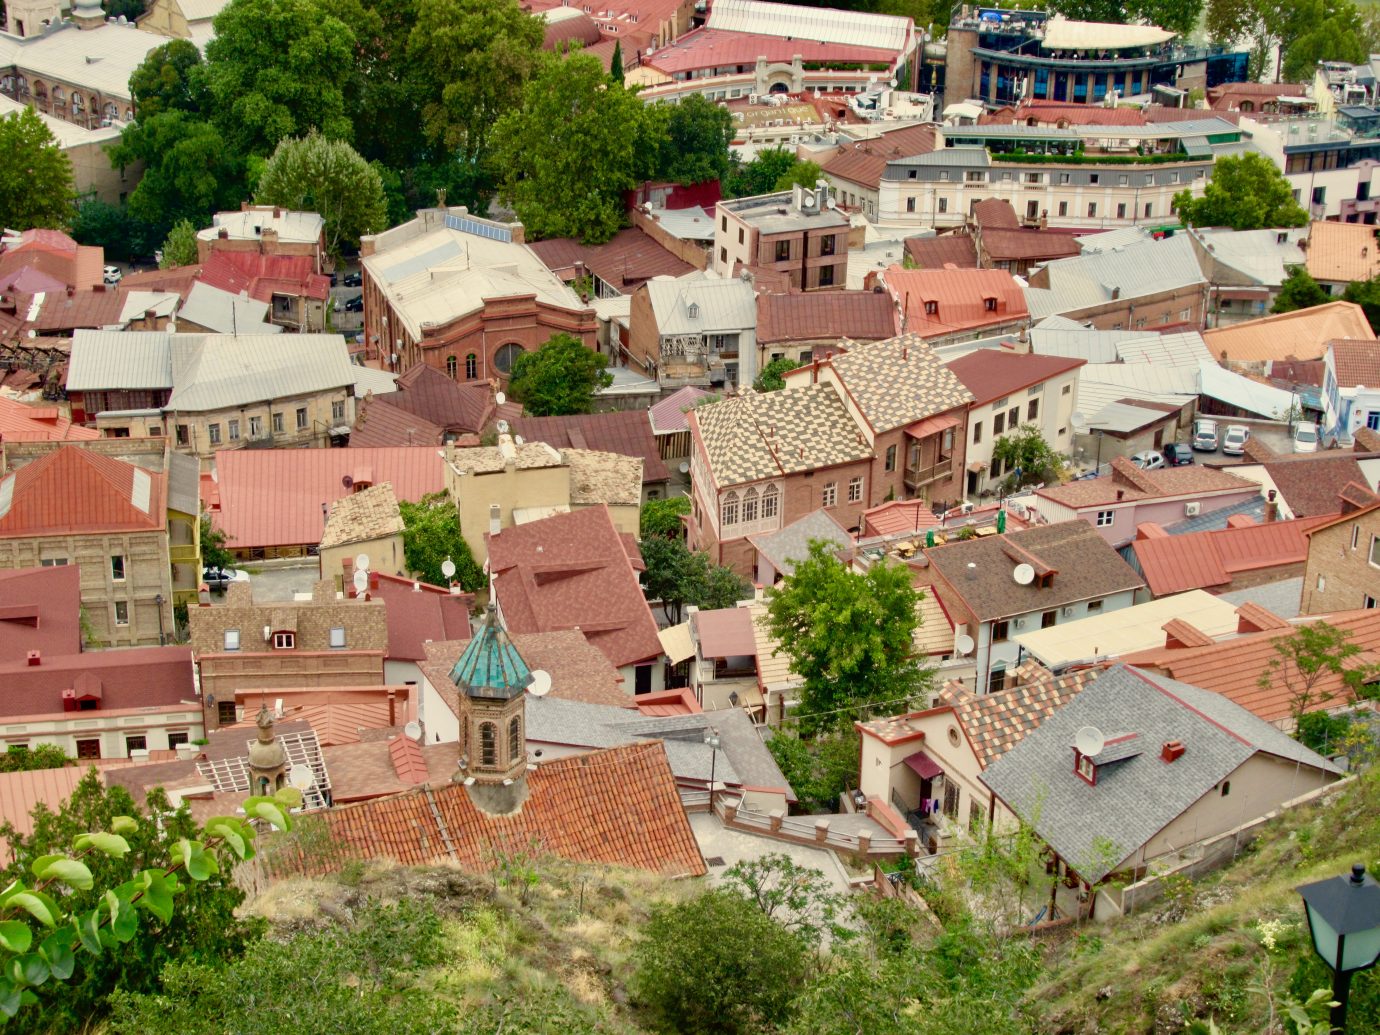 Overhead view of Old Town in Tbilisi